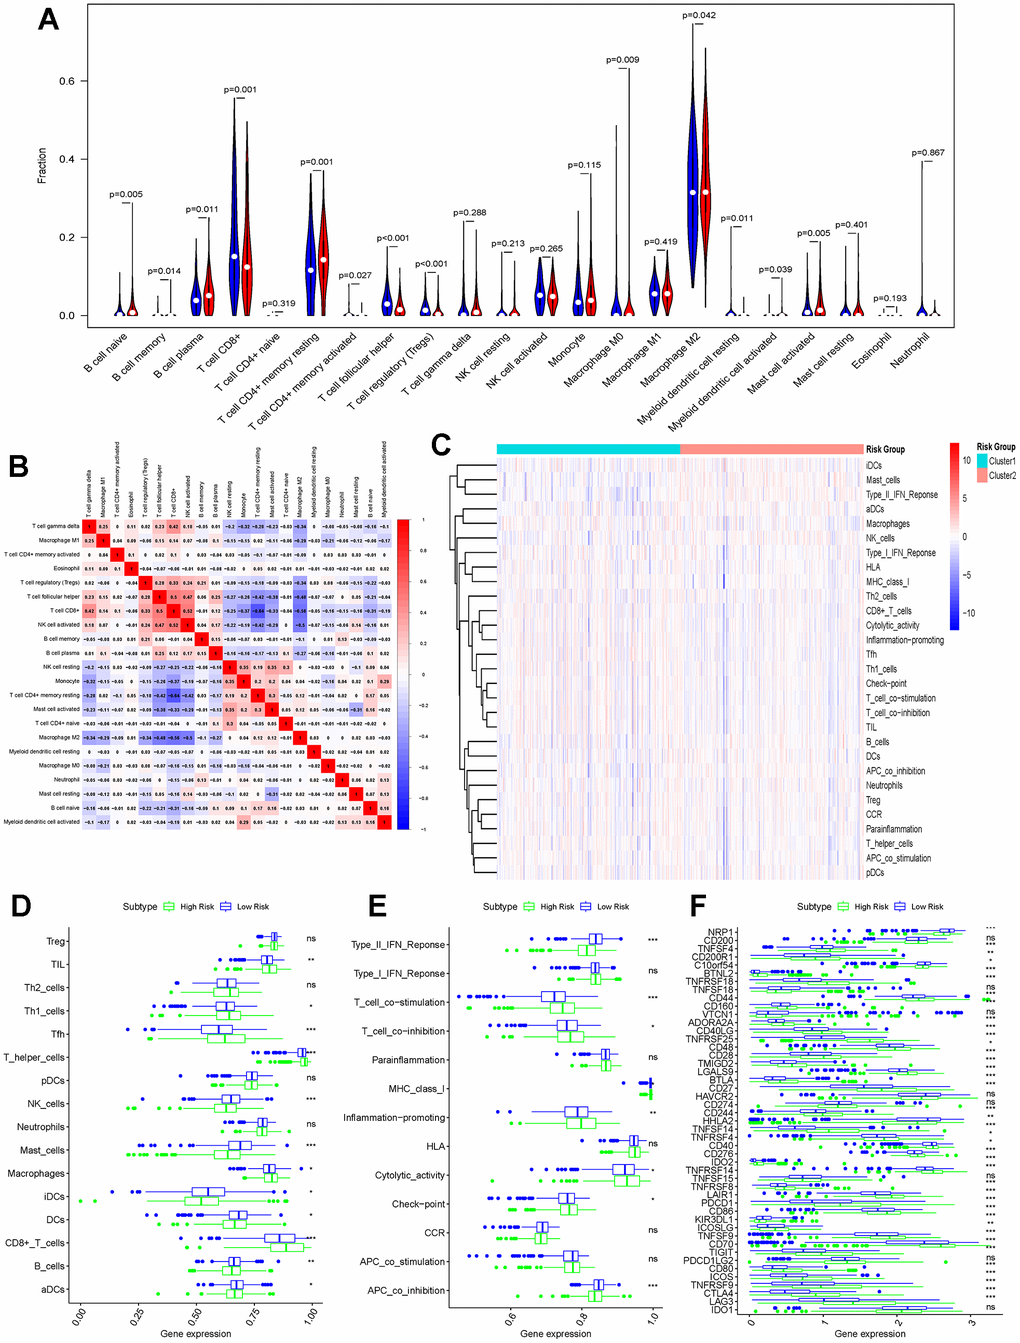 Differences in immune function between high-risk and low-risk groups. (A) CIBERSORT algorithm analysing the landscape of immune infiltration in patients in the high-risk and low-risk groups; (B) Immune cell correlation analysis in the CIBERSORT algorithm; (C) Heatmap showing the ssGESA algorithm analysing the differences in immune cells and immune infiltration in the high-risk and low-risk groups (Cluster1 represents the high-risk group; Cluster2 represents the low-risk group); (D) Bar graph demonstrating the difference in immune cell infiltration in the high-risk and low-risk groups under the ssGESA algorithm; (E) Differences in immune function between high-risk and low-risk groups by the ssGESA algorithm are demonstrated using bar graphs; (F) Bar graphs further demonstrating differences in the expression of immune checkpoints in the high-risk and low-risk groups. (*p 